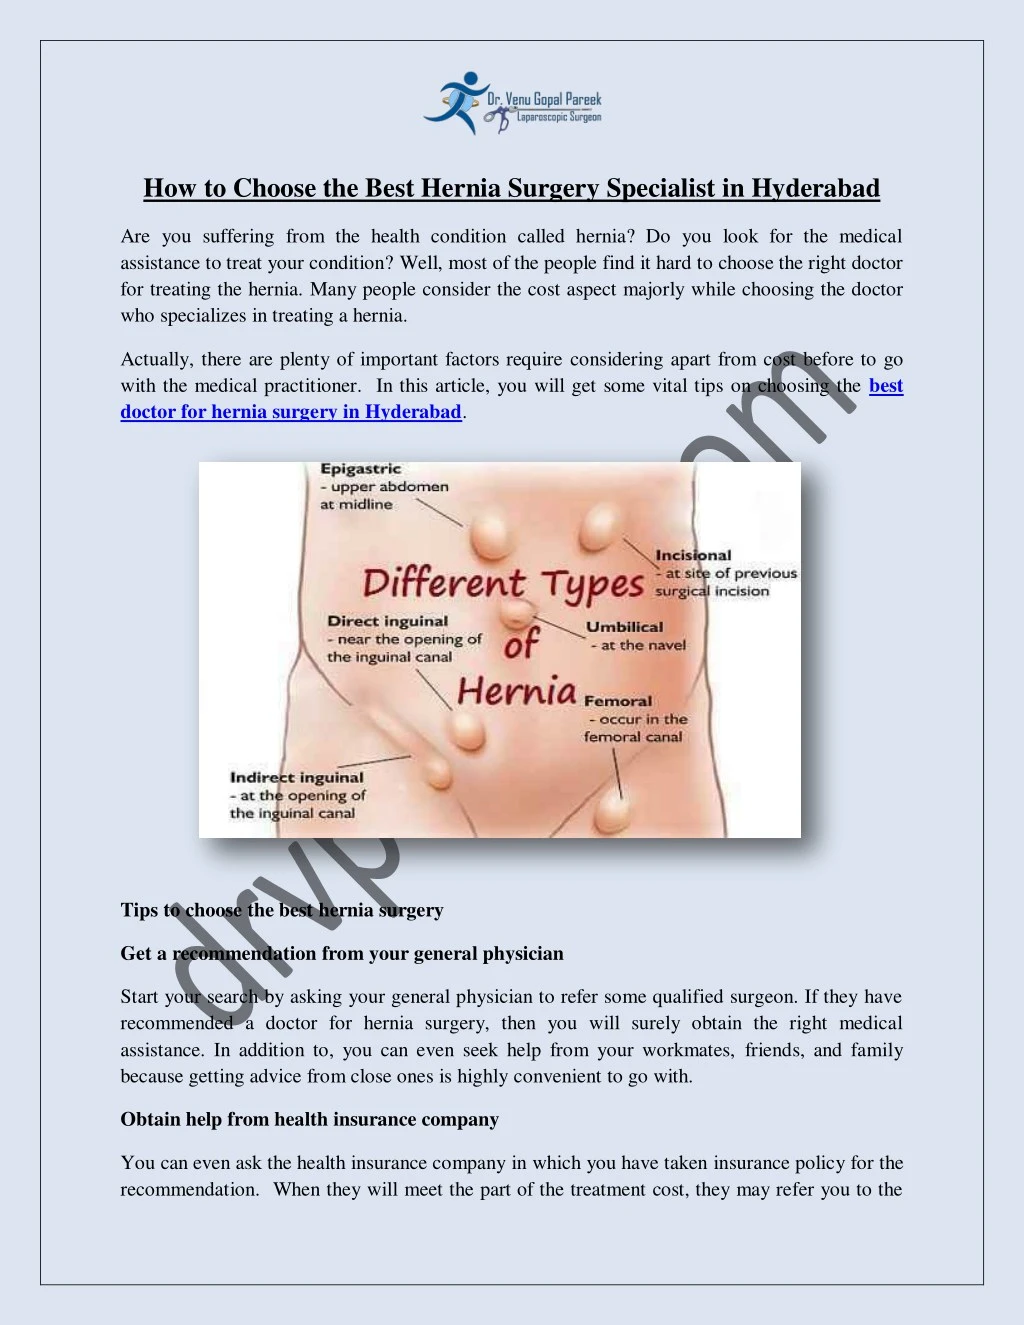 how to choose the best hernia surgery specialist